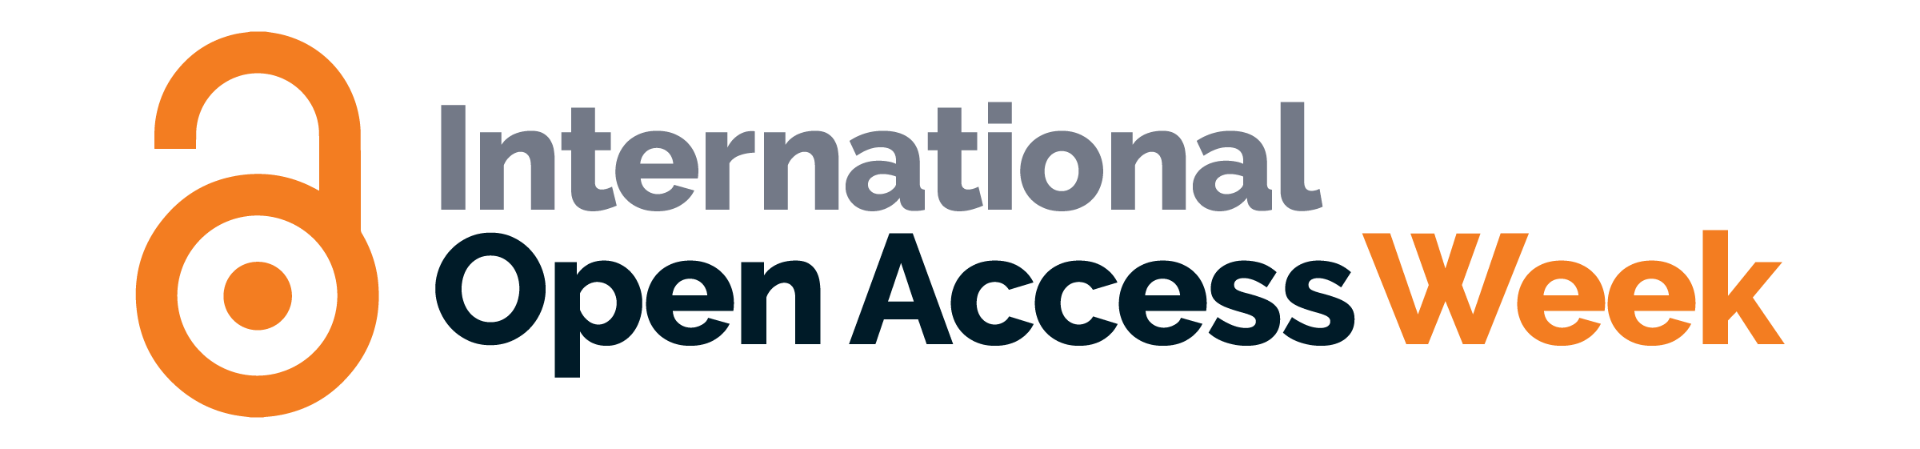 International Open Access week - text on a white background, with an orange padlock to the left.</body></html>